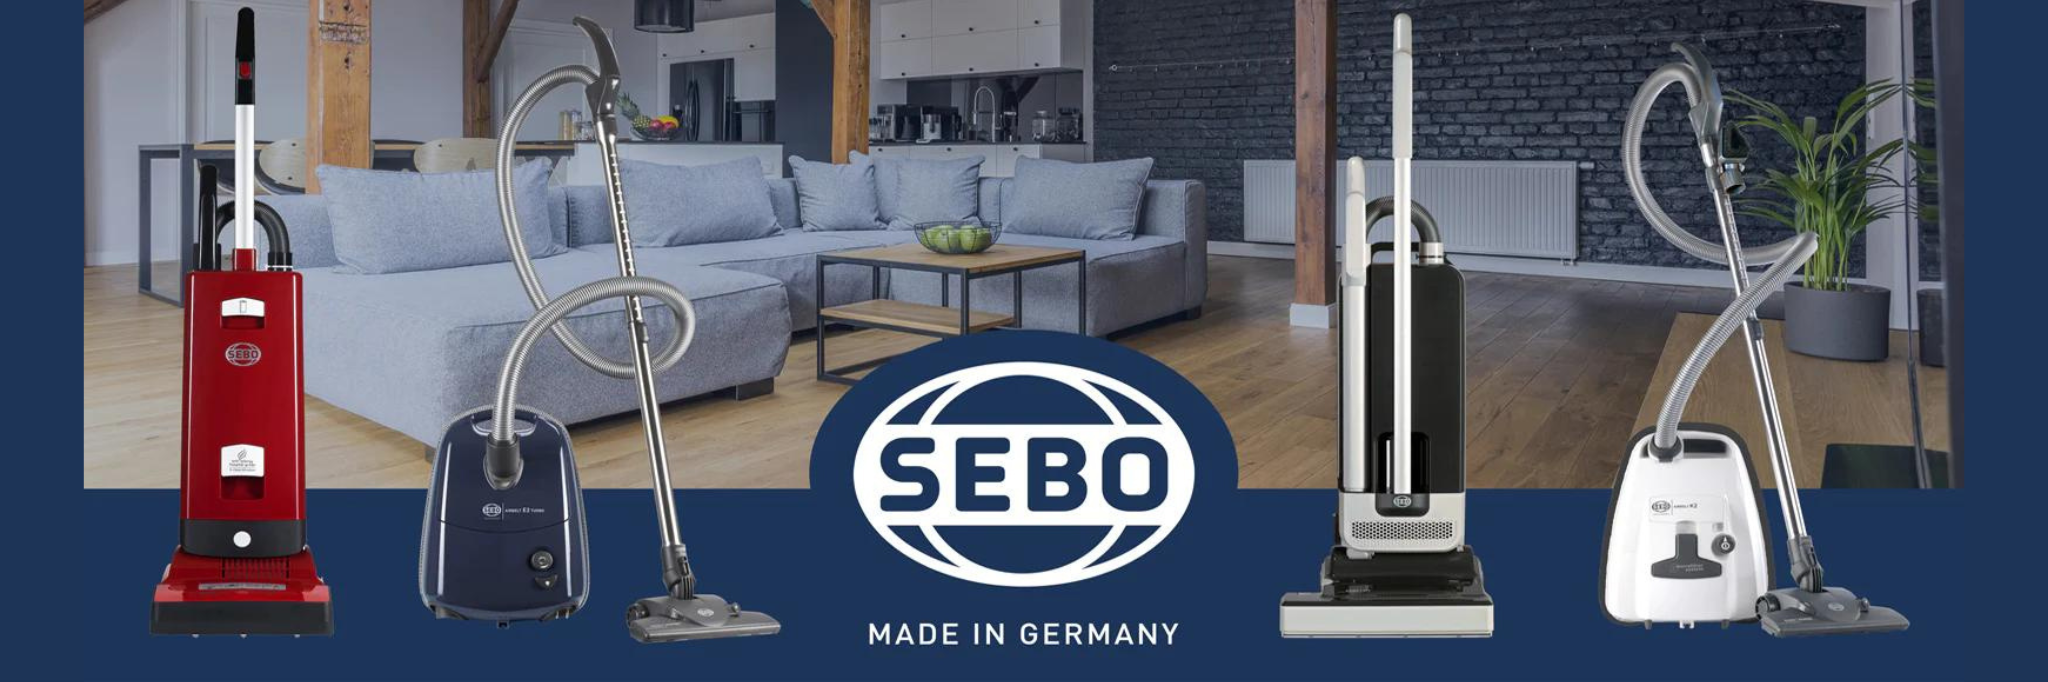 A line up of Sebo Vacuum cleaners in a living room